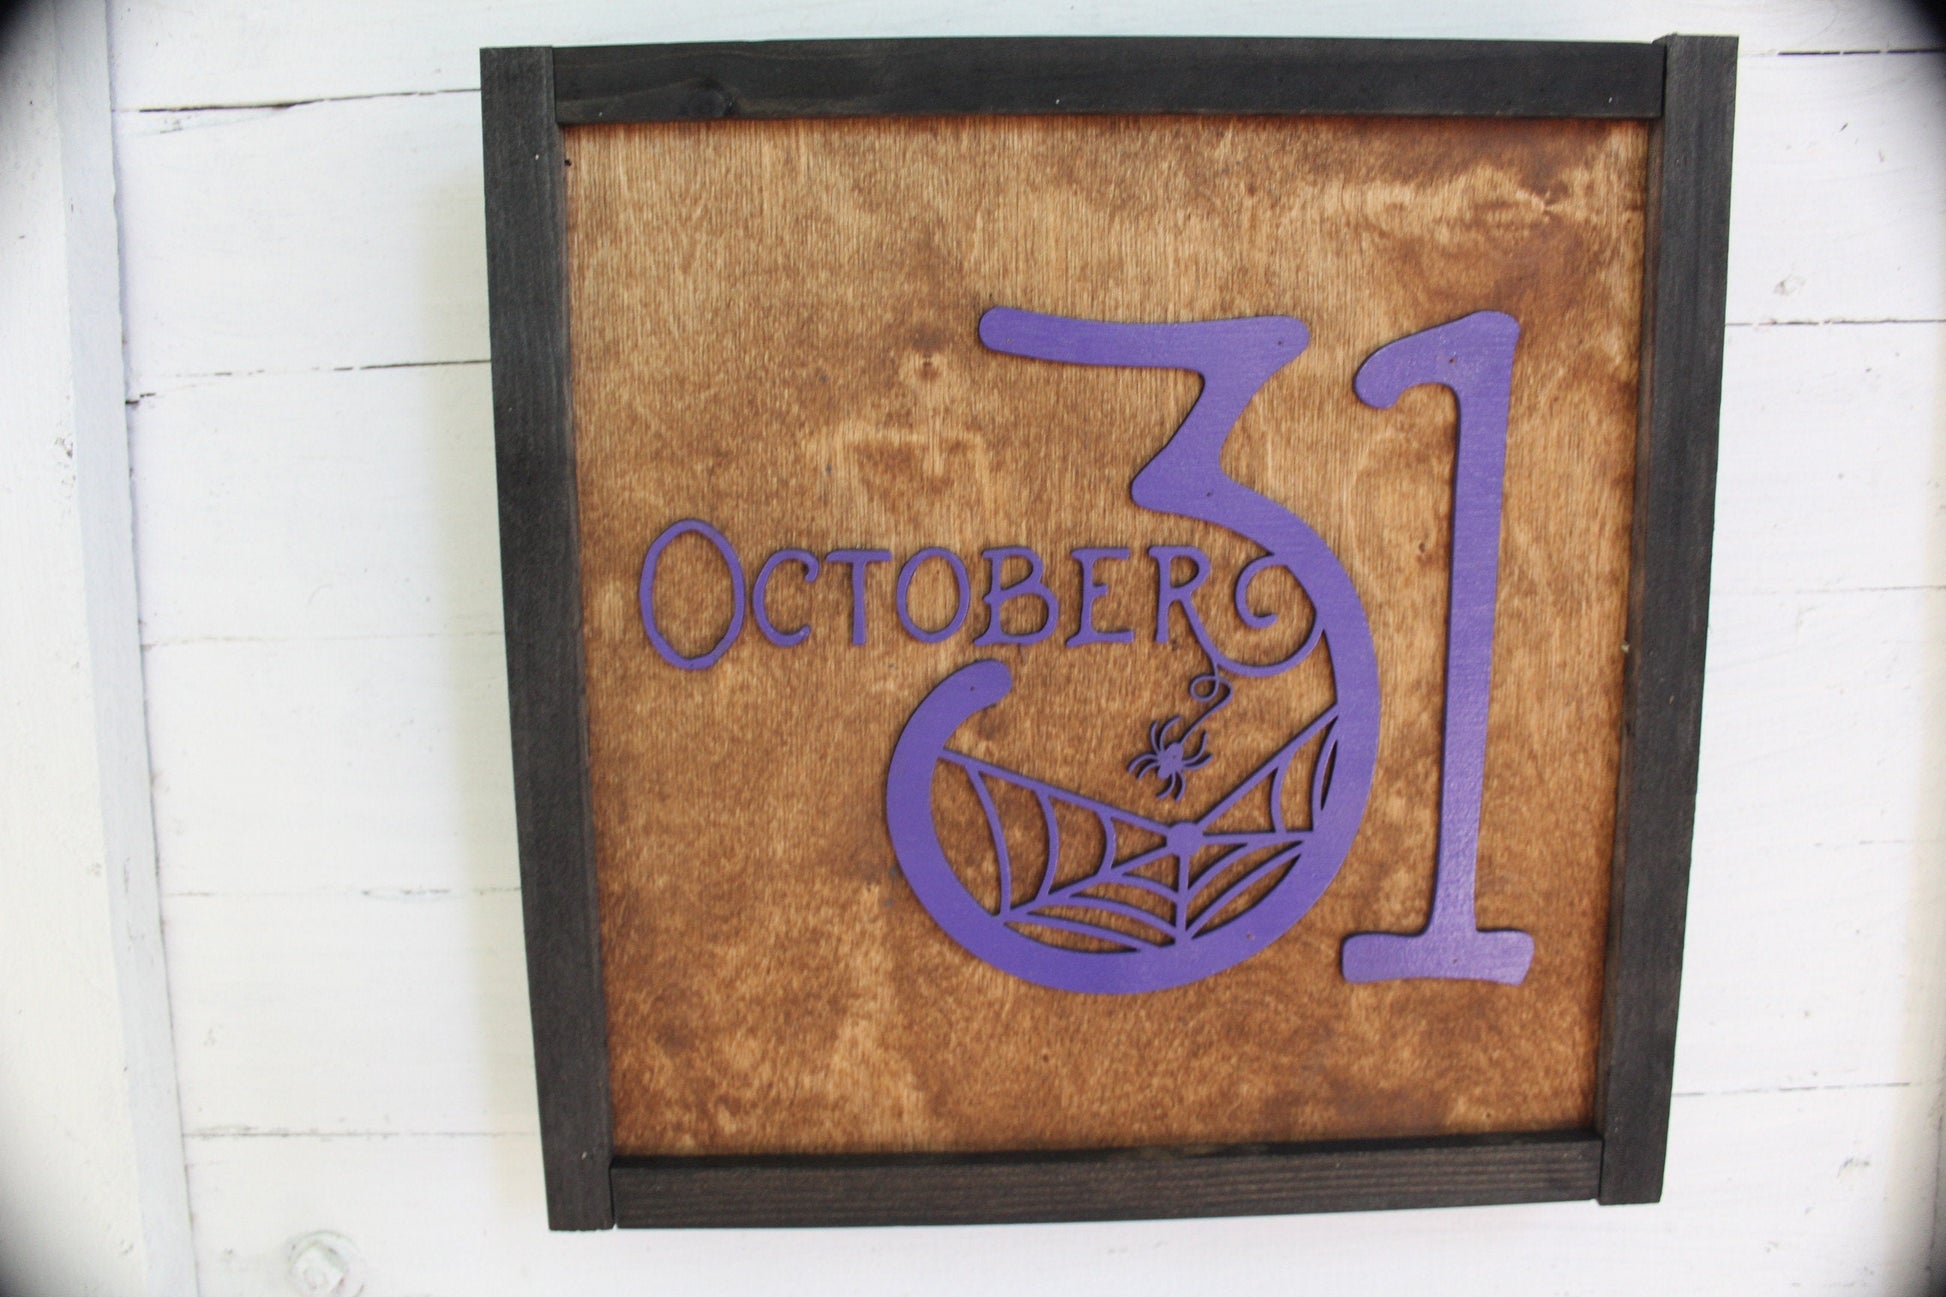 October 31st Halloween Square Wood Sign Rustic Purple Chic Web Spooky Seasonal Autumn Fall Outdoor Indoor Stained Framed Customizable